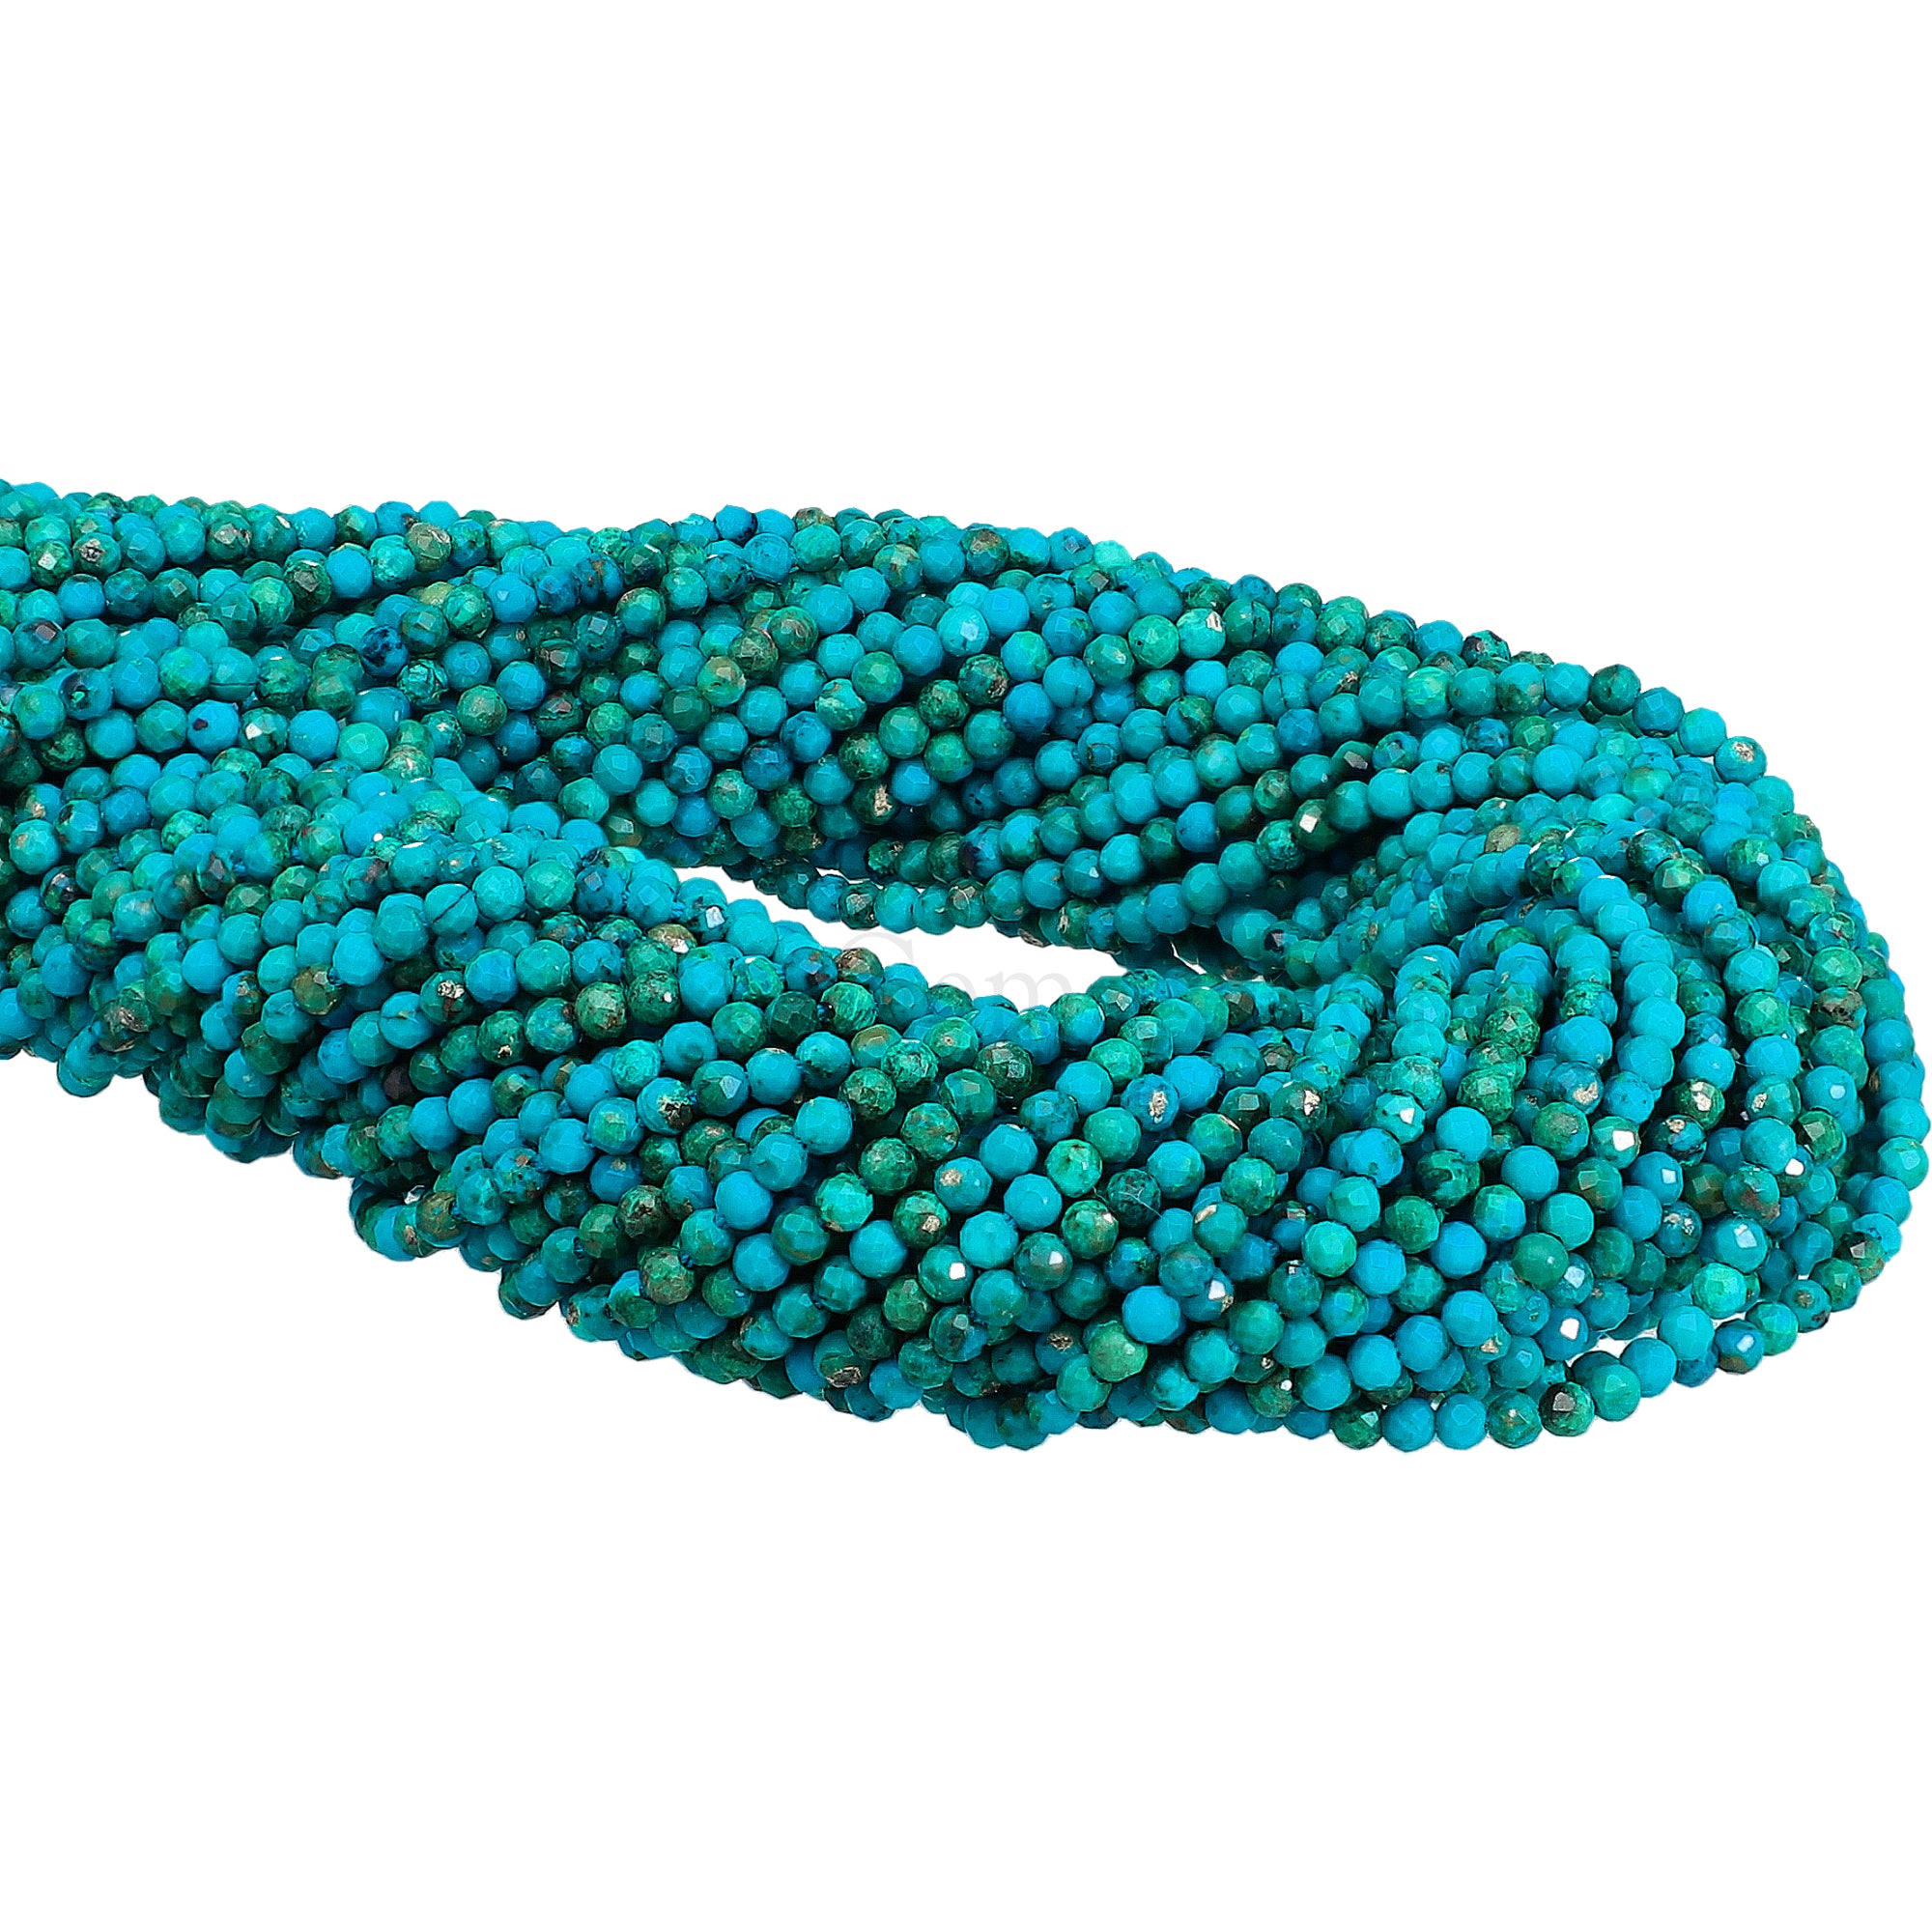 1.8-2.0 MM Chrysocolla Faceted Round Beads